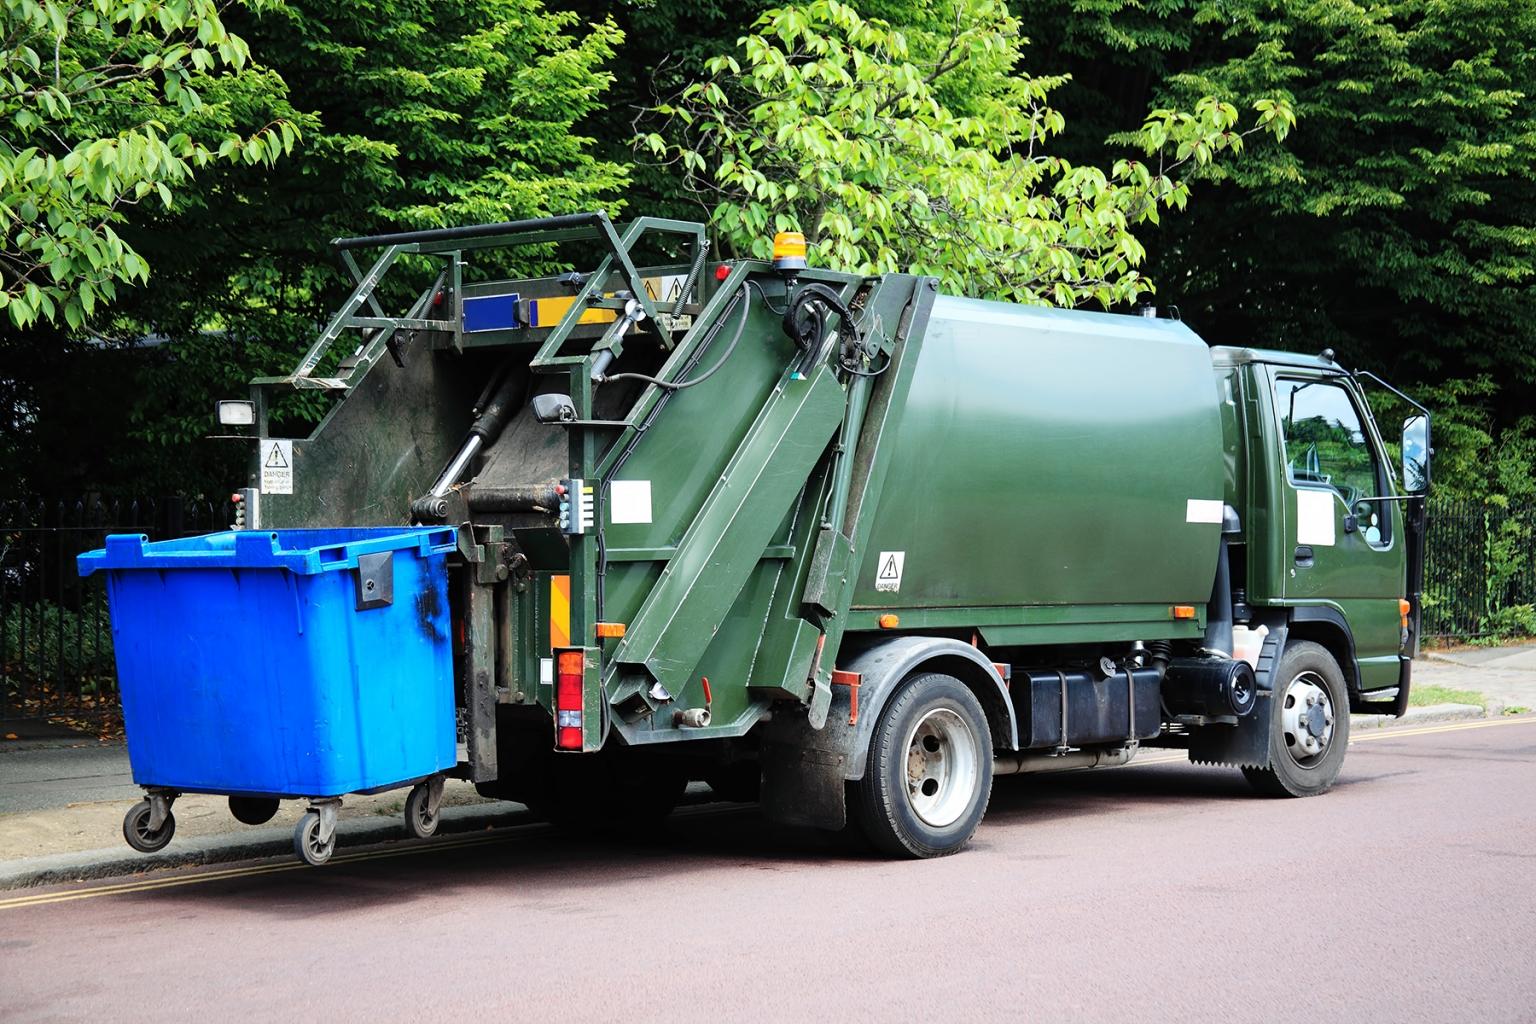 Garbage Pickup & Disposal Services in Toronto Ontario | Waste Removal